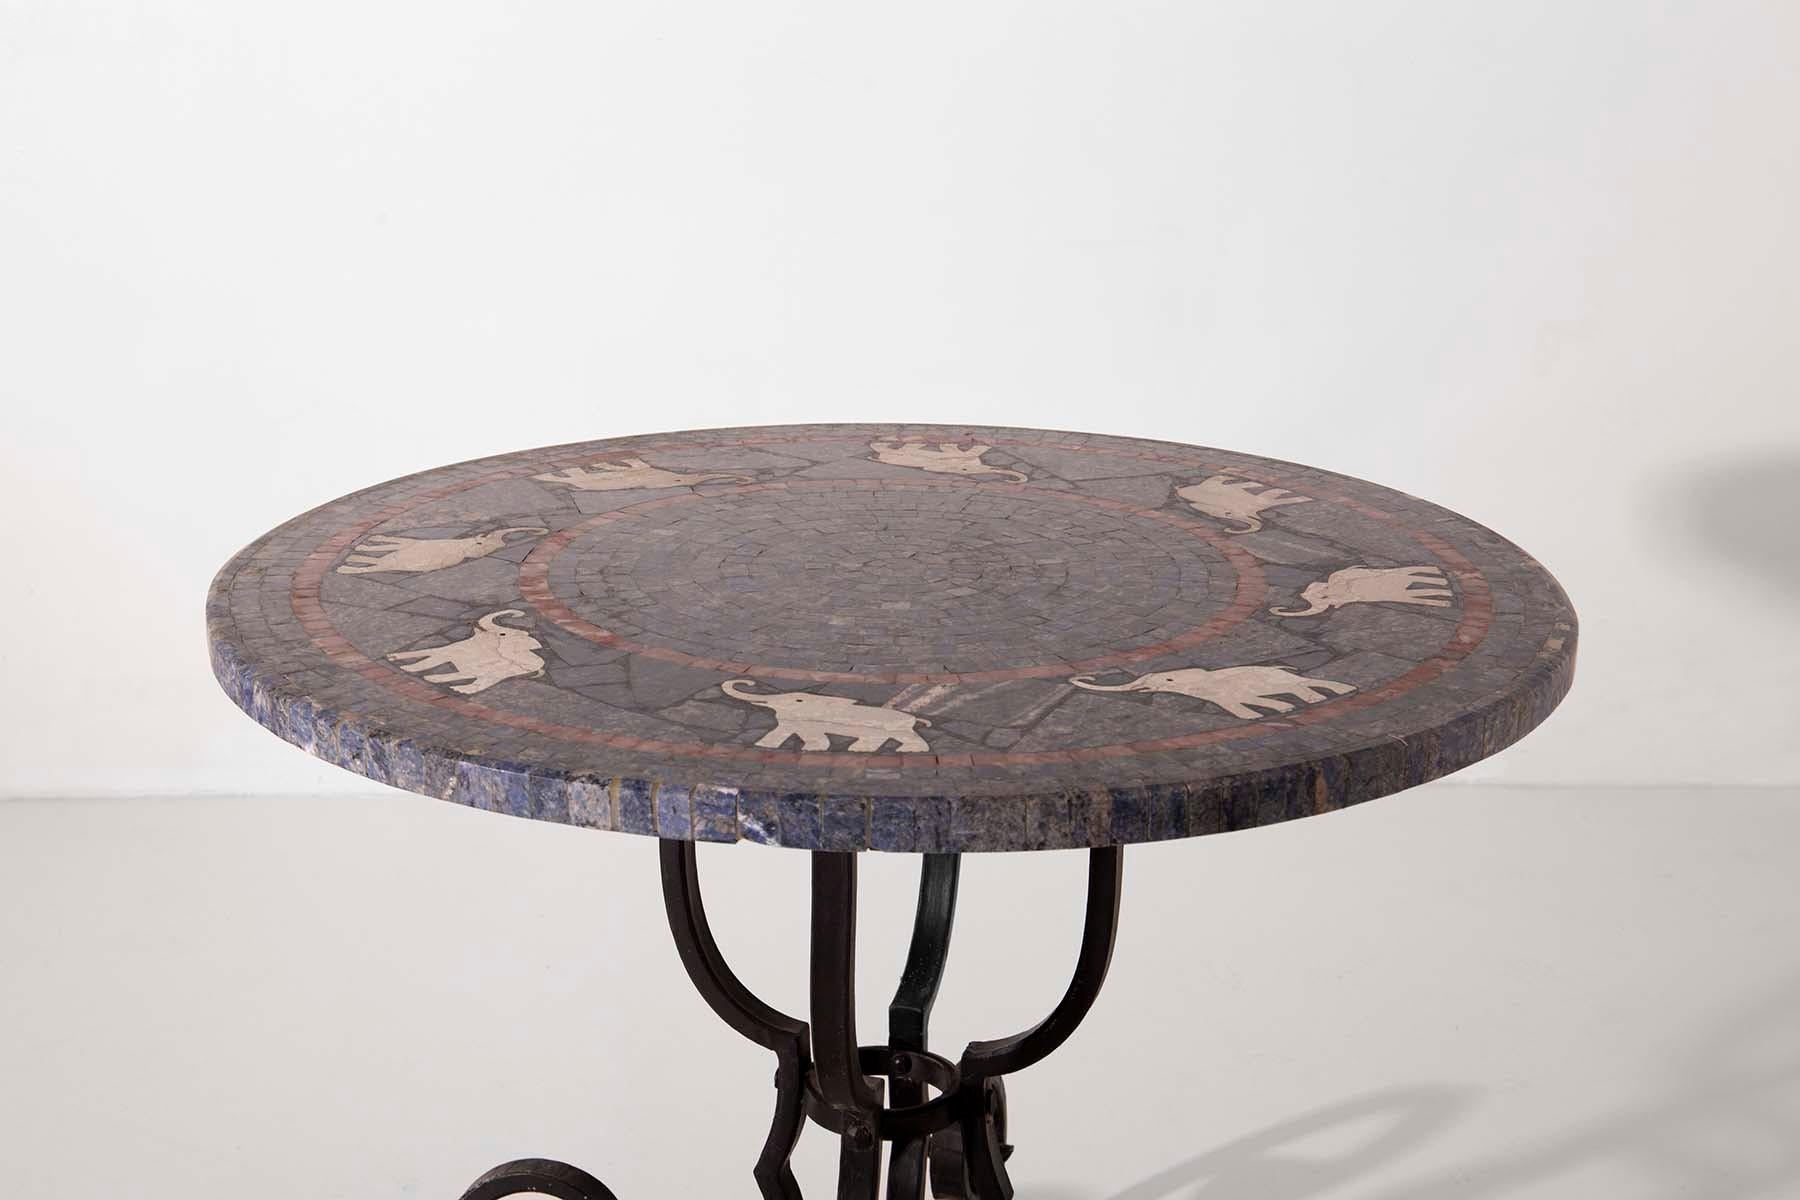 This extraordinary Italian-made coffee table from the early 1900s is a testament to the artistry and craftsmanship of a bygone era. The four wrought-iron legs culminate in elegant curls, adding a touch of grace to the entire table.

What sets this